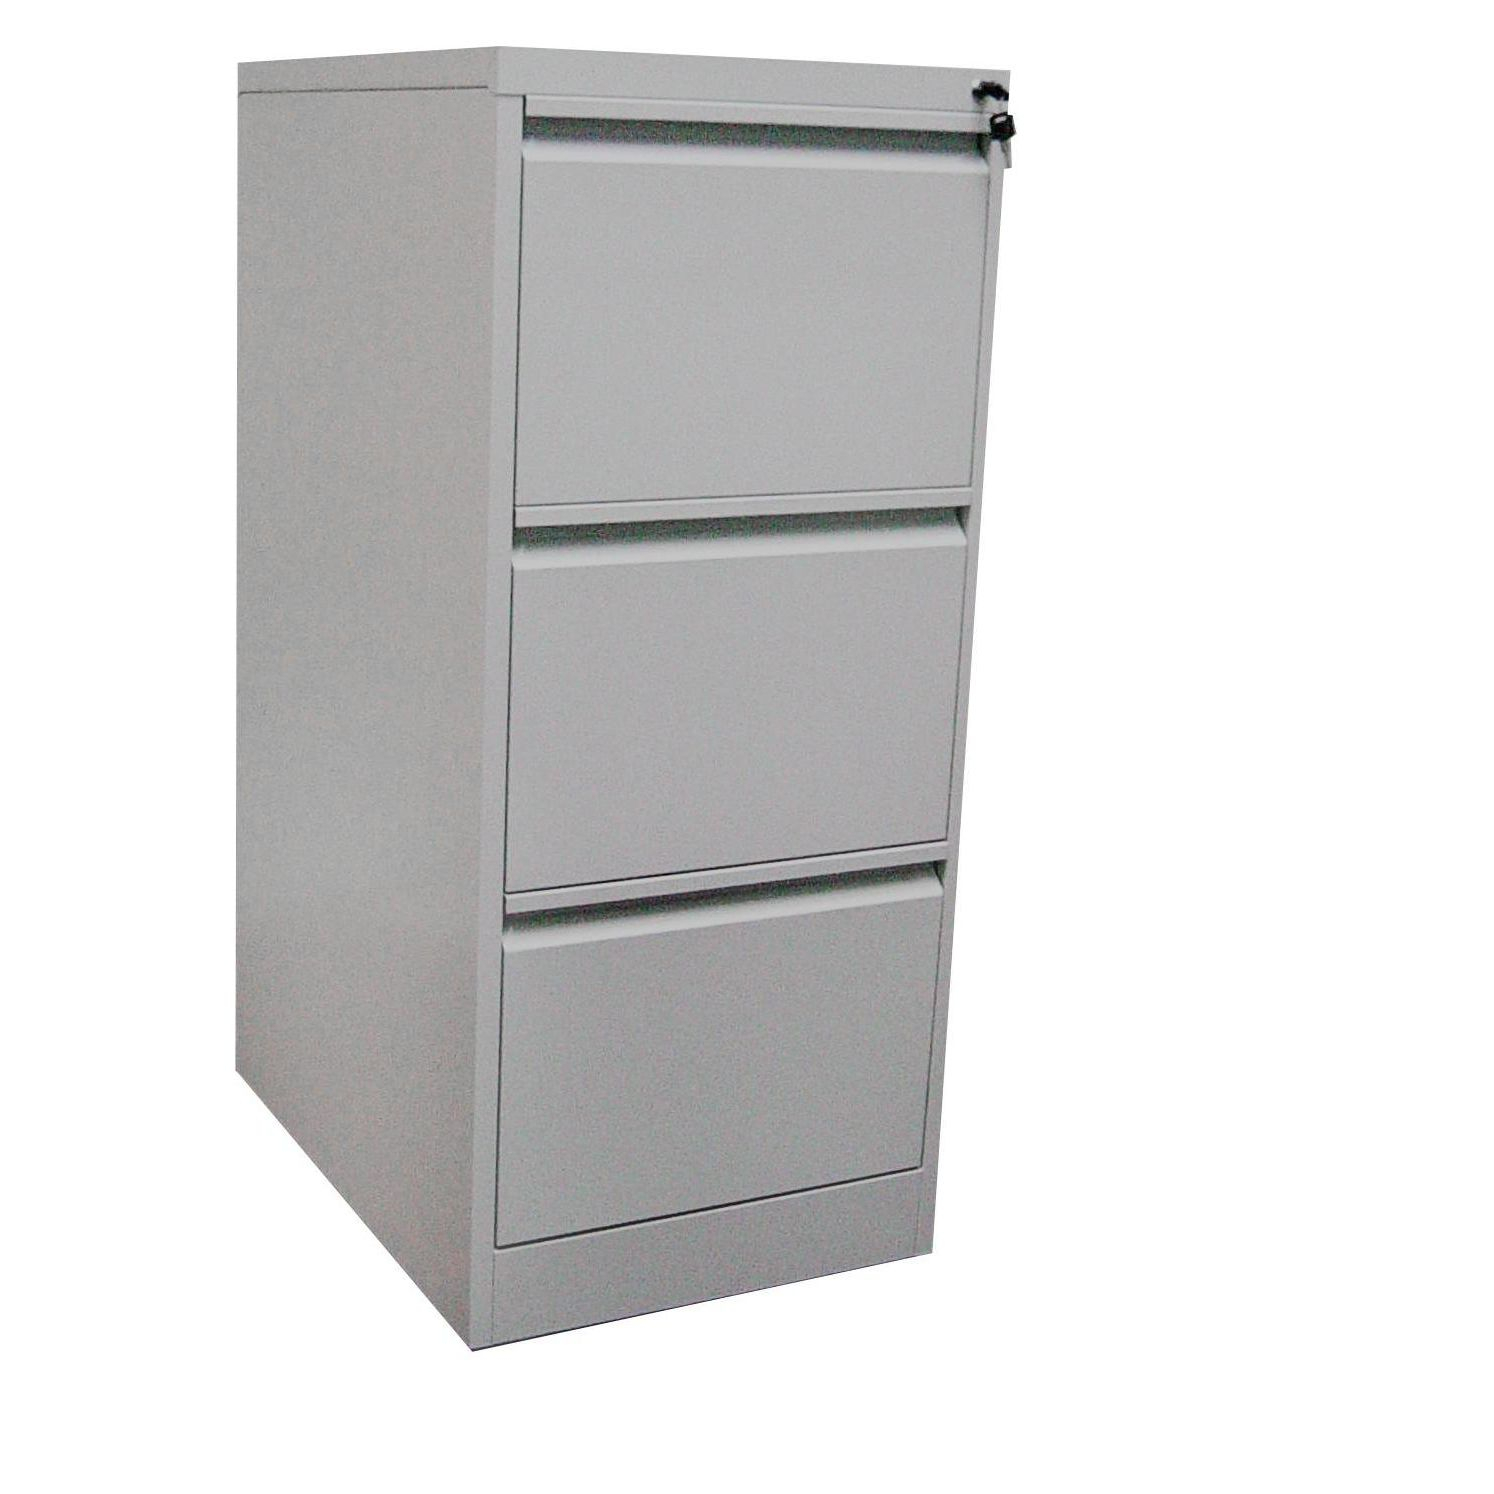 Low Filing Cabinet Steel With Drawers Modular Fl030 Fleda for size 1494 X 1494